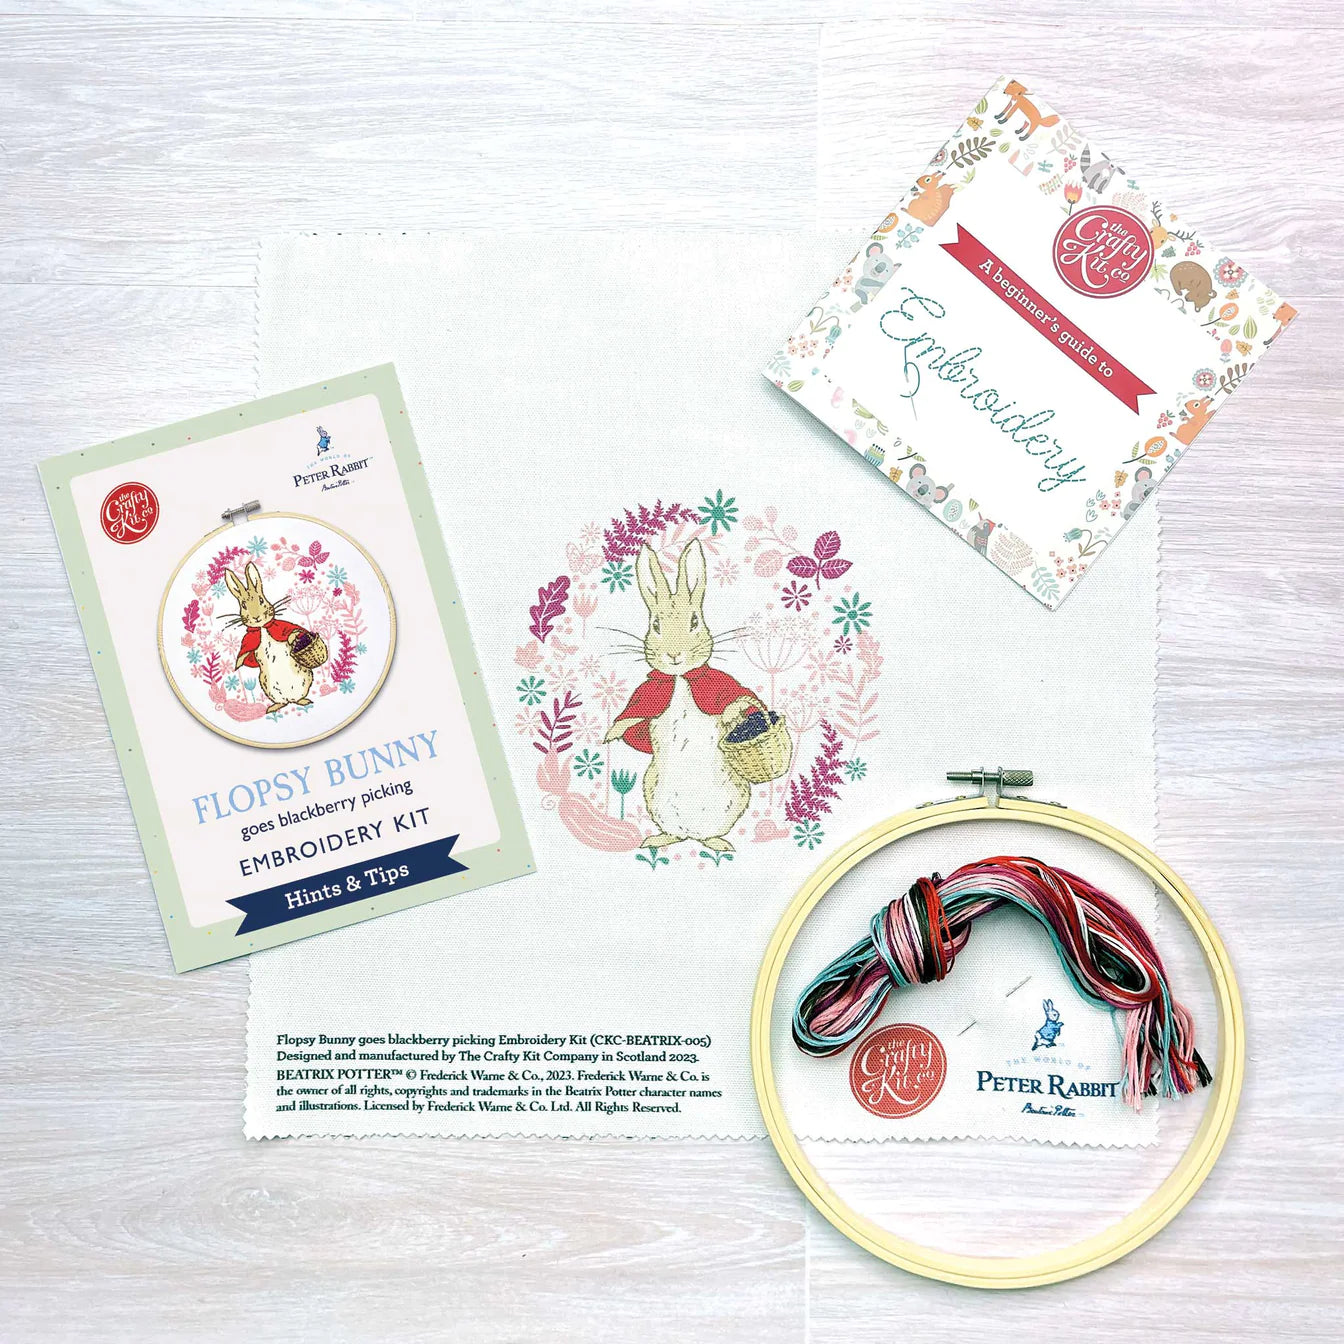 Flopsy Bunny Embroidery Kit from The Crafty Kit Company